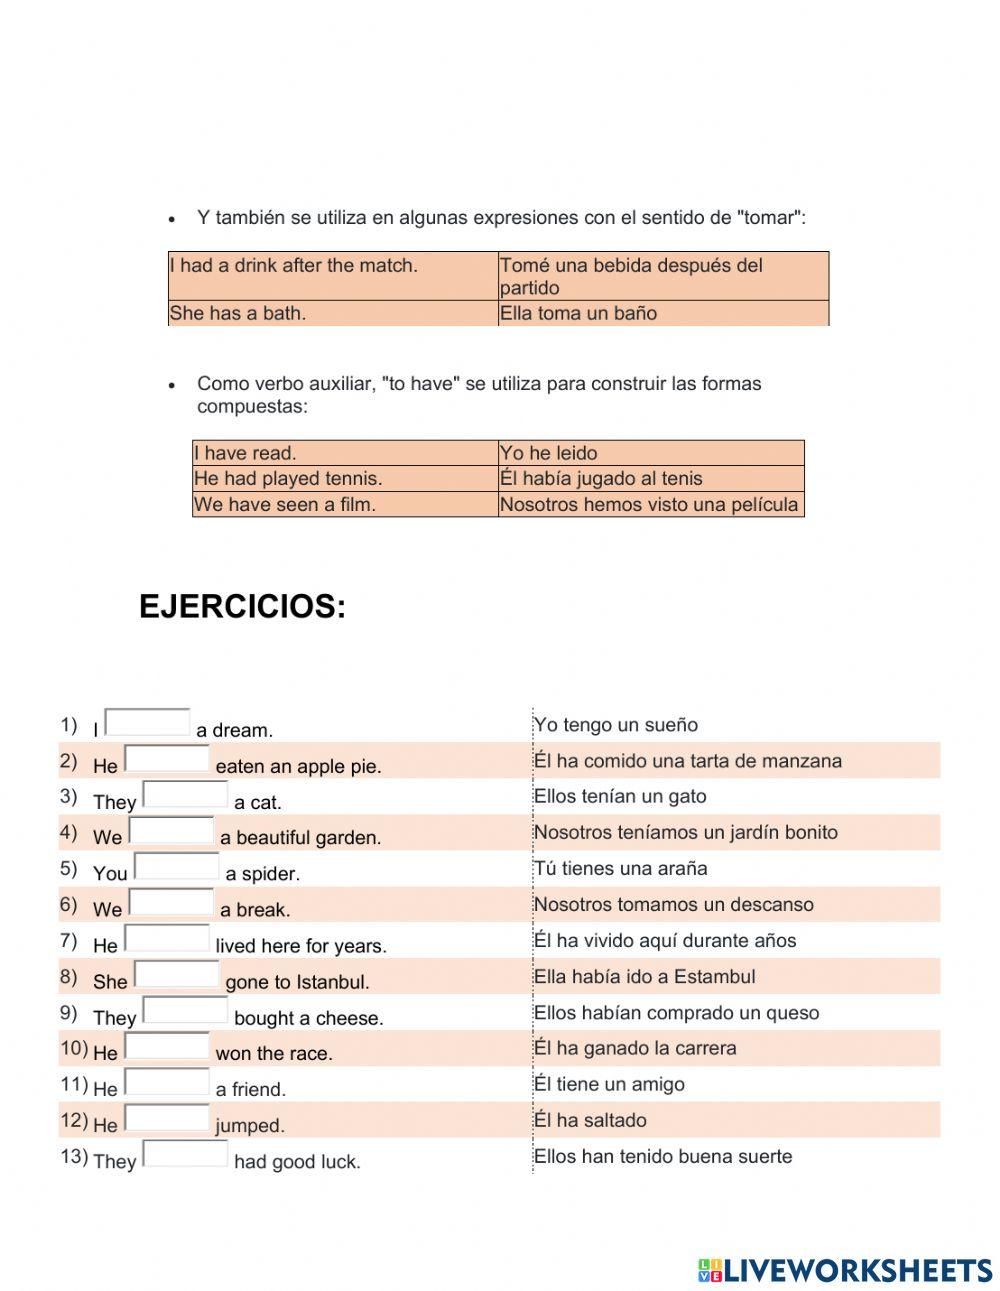 Verbo to have - exercises